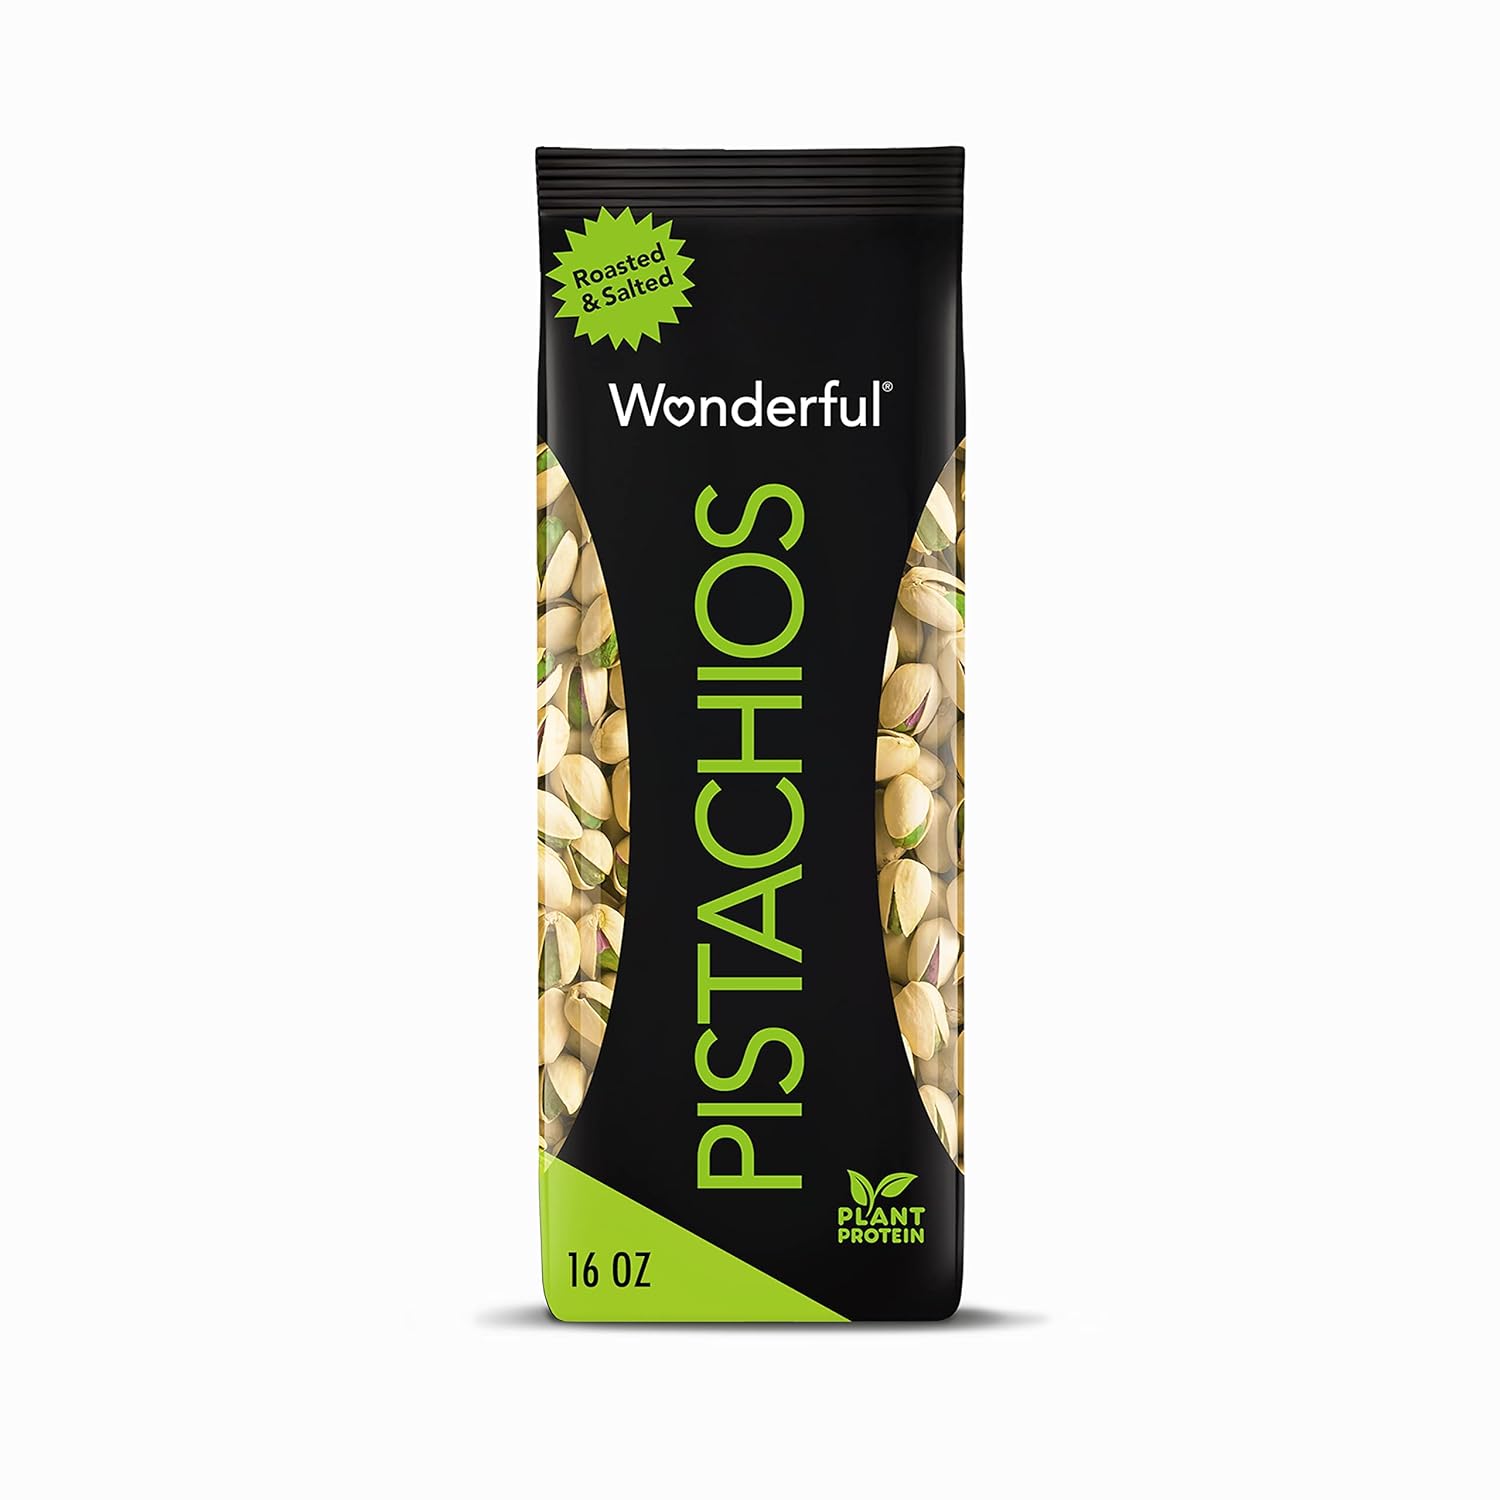 16-Oz Wonderful Pistachios In Shell (Roasted & Salted) $4.79 w/ S&S + Free Shipping w/ Prime or on orders over $35